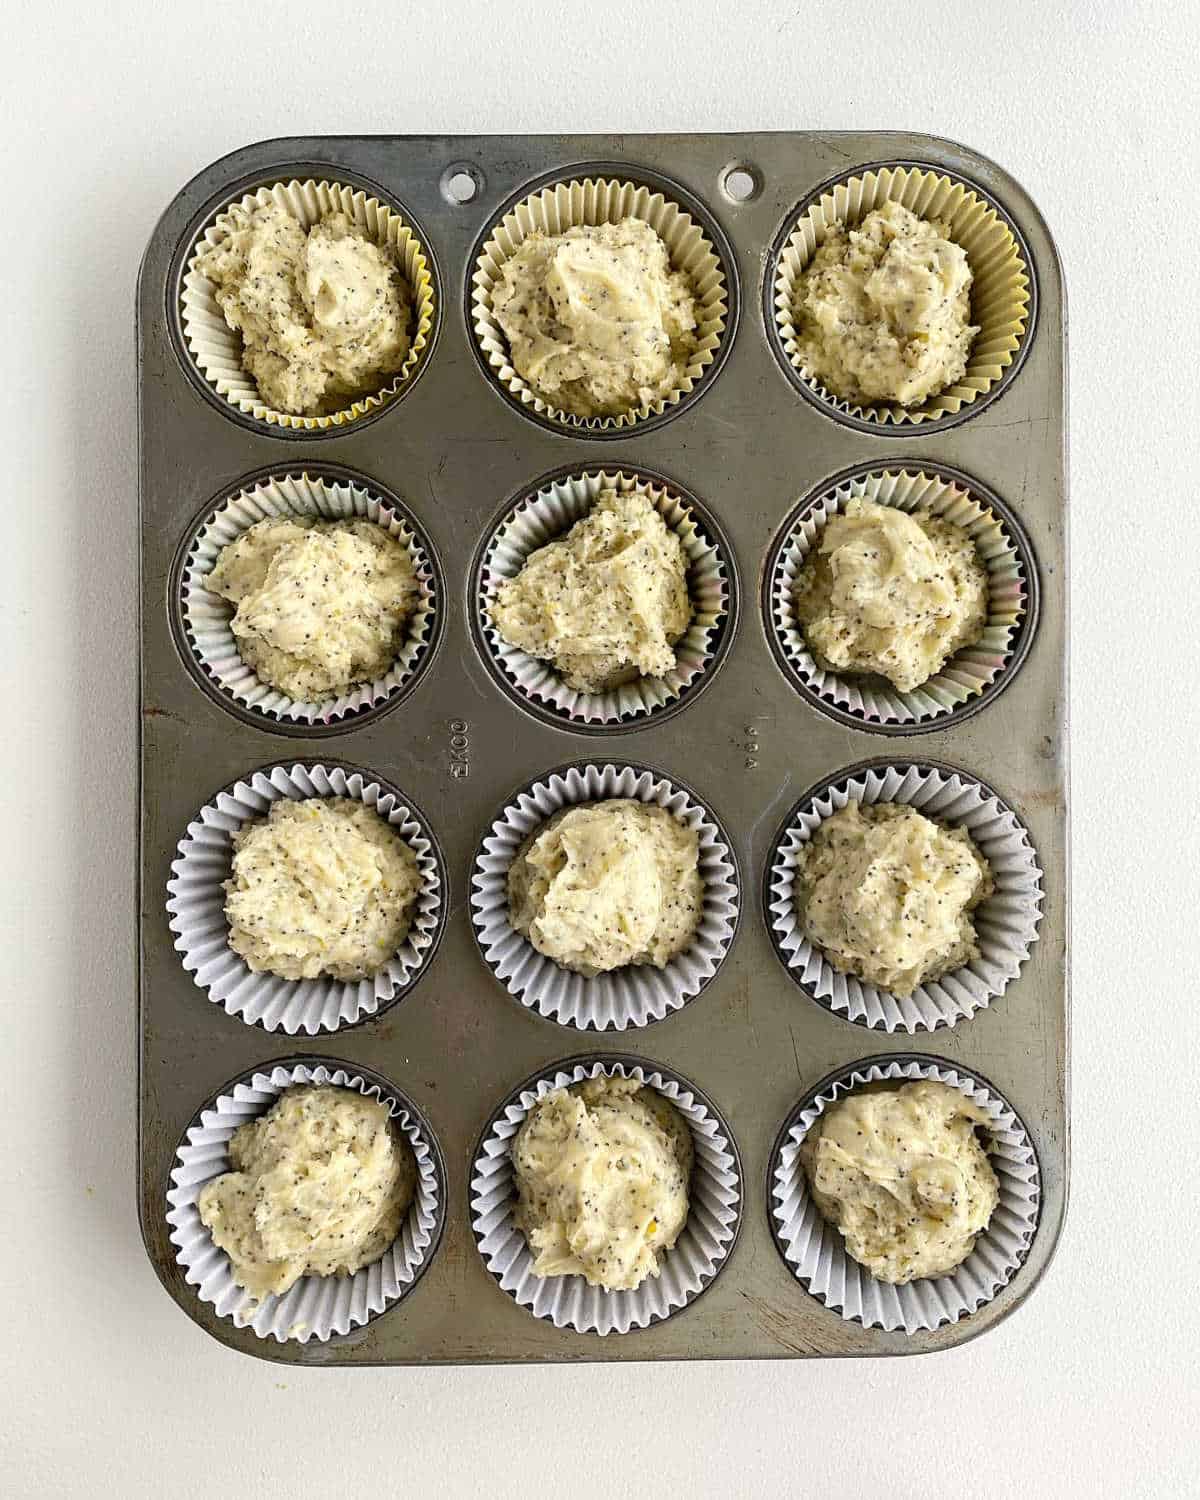 Metal muffin pan filled with lemon poppy seed batter on a white surface.